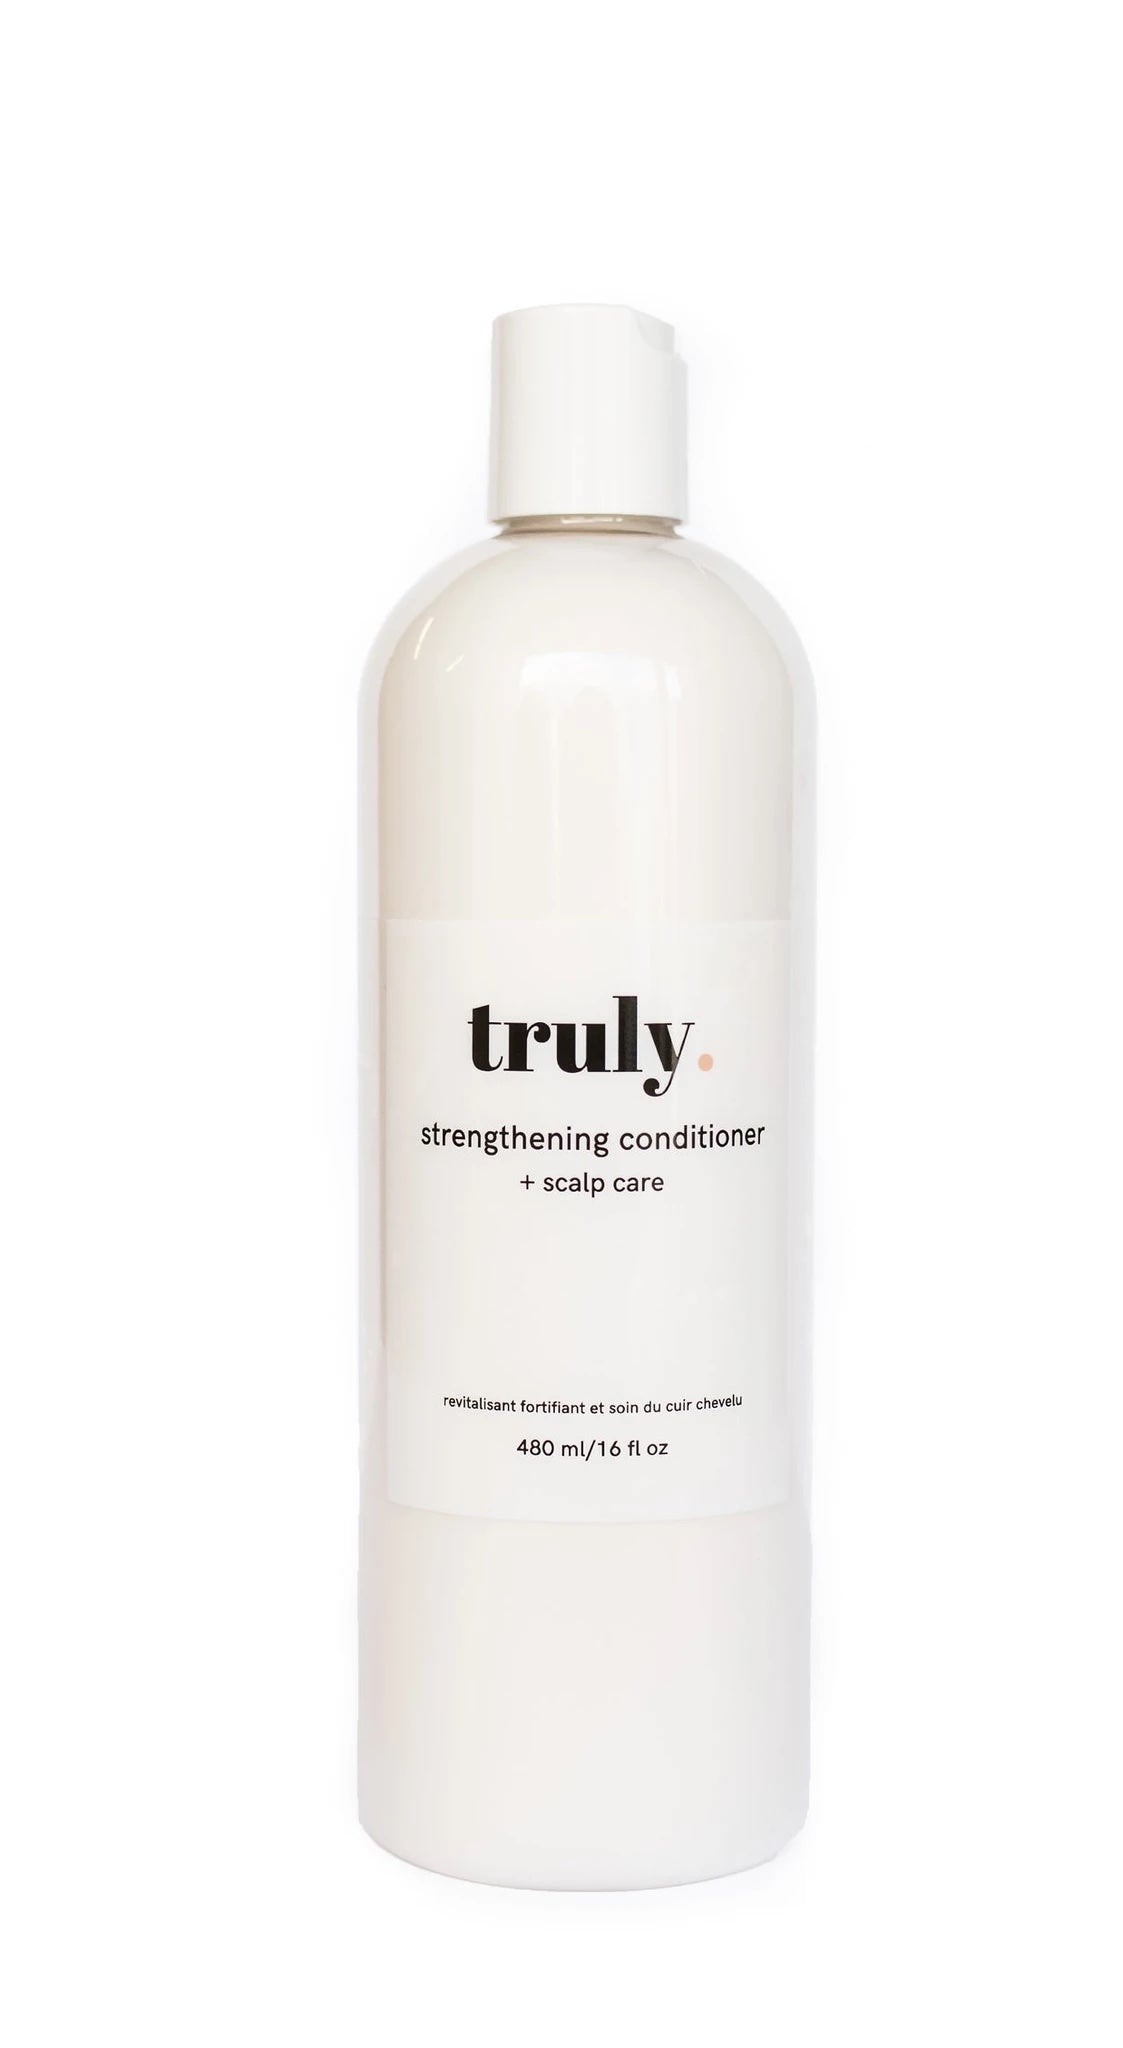 Truly Strengthening Conditioner